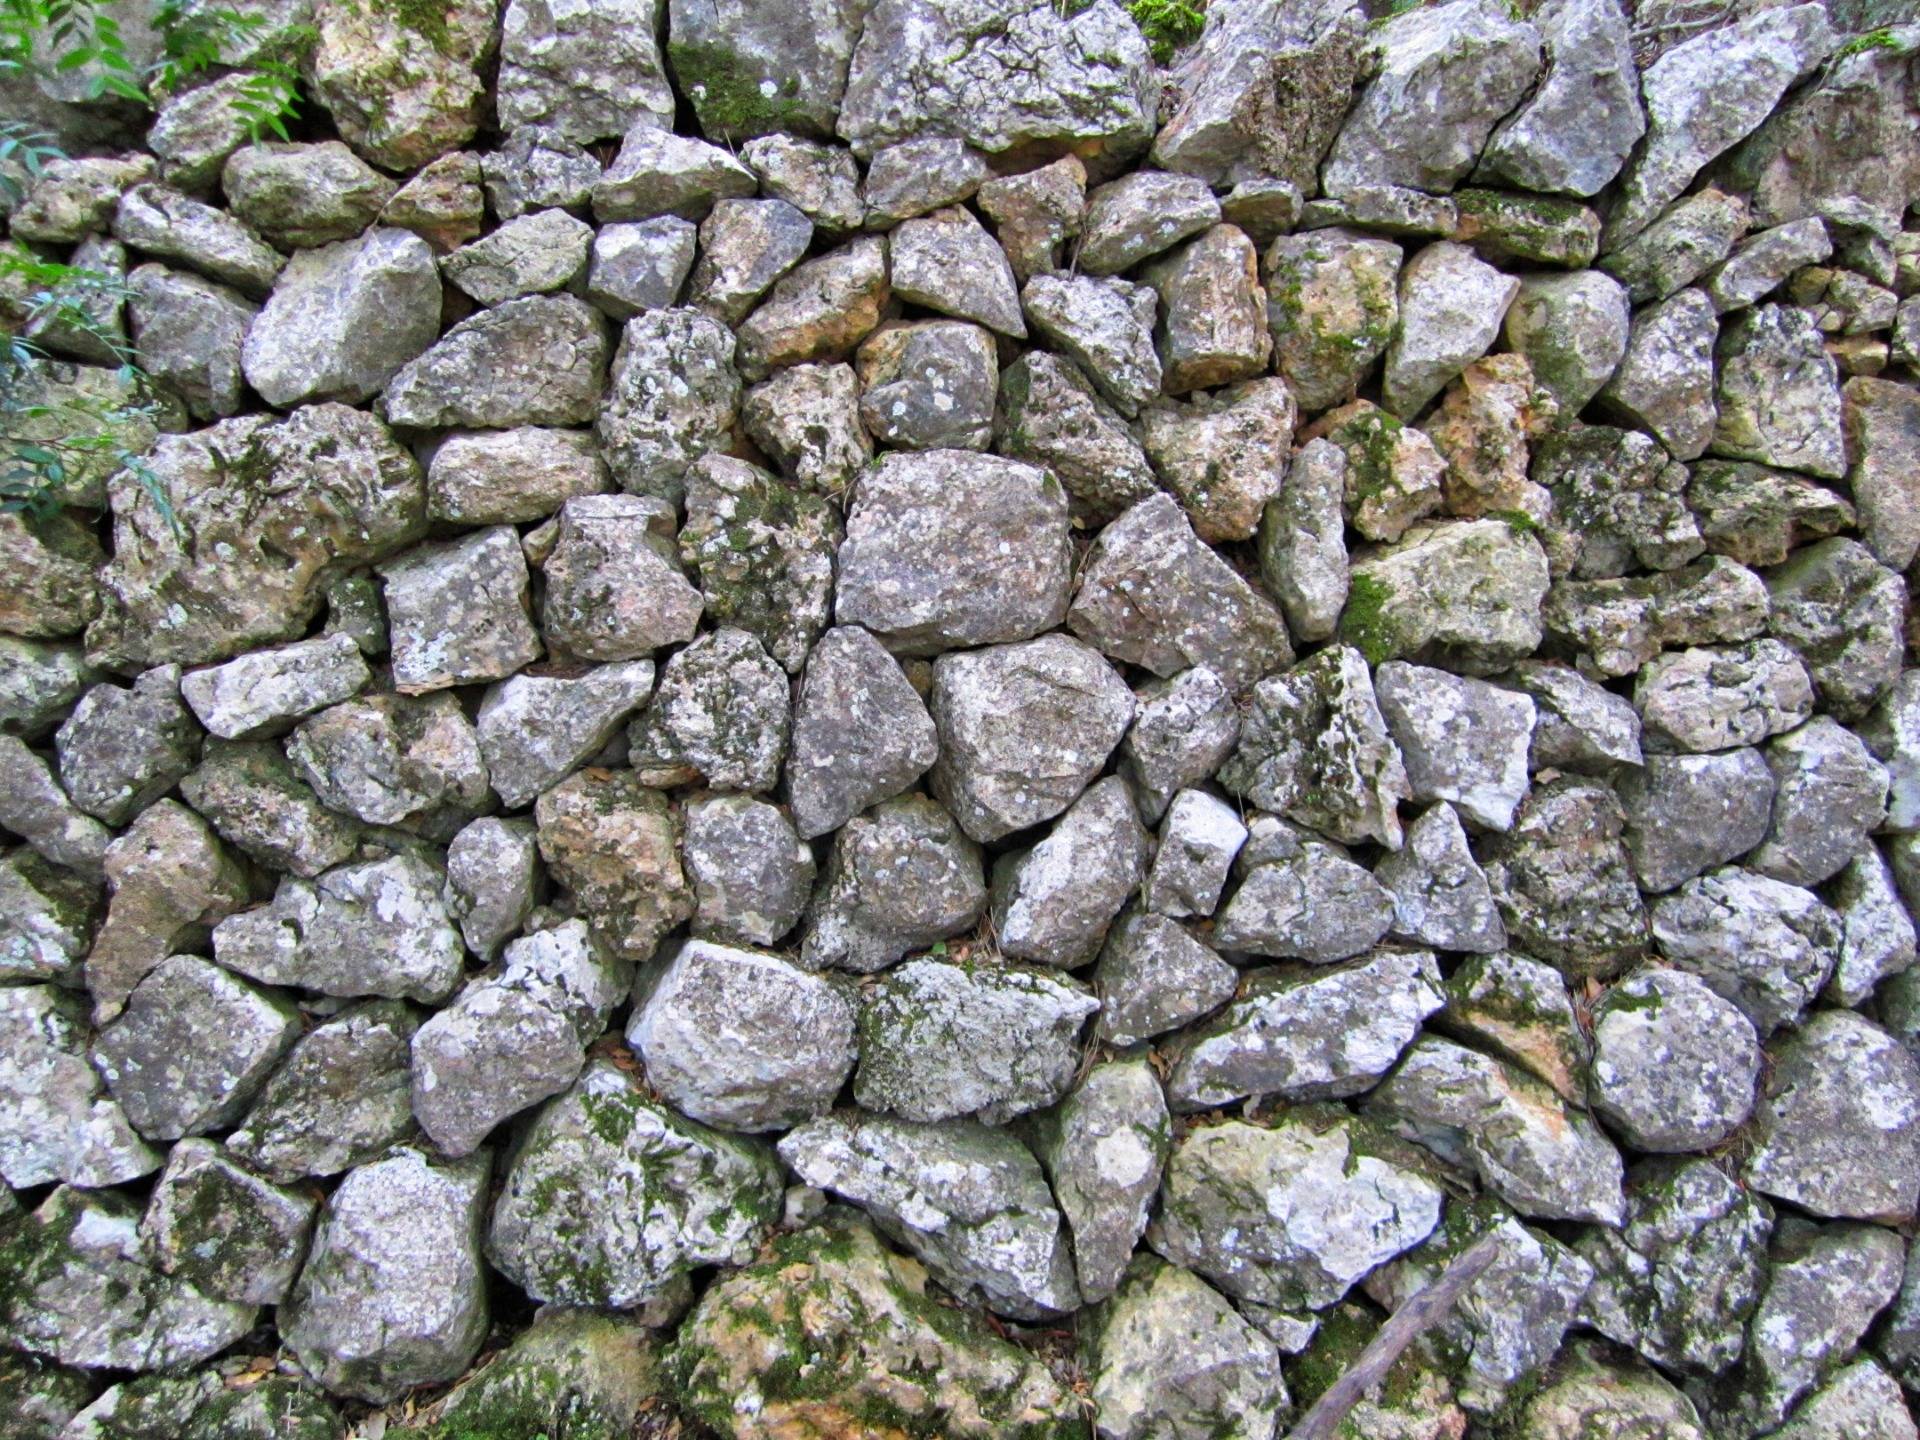 Stone wall, not the general